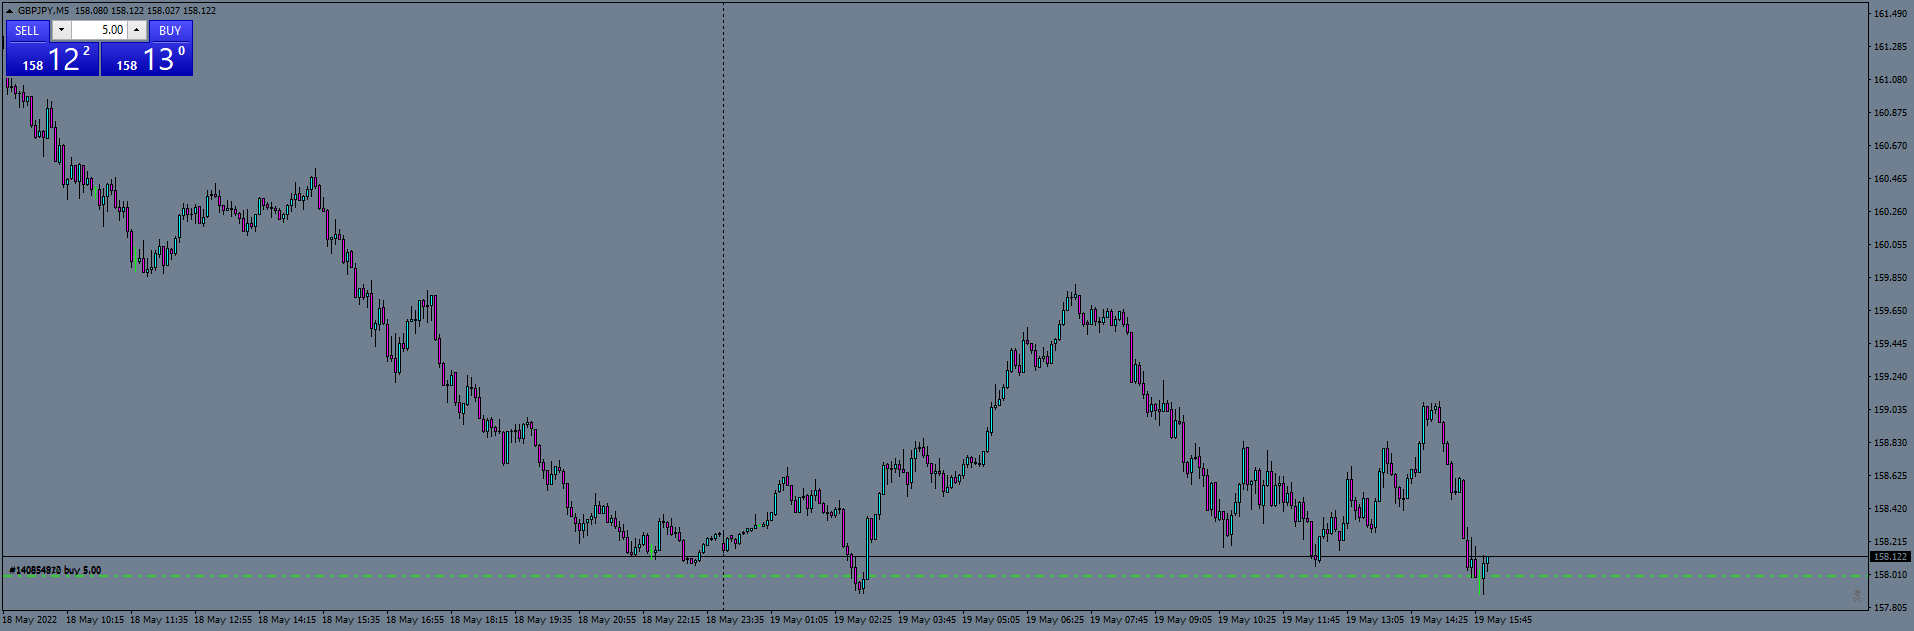 gbpjpy-m5-ftmo-s-r.png